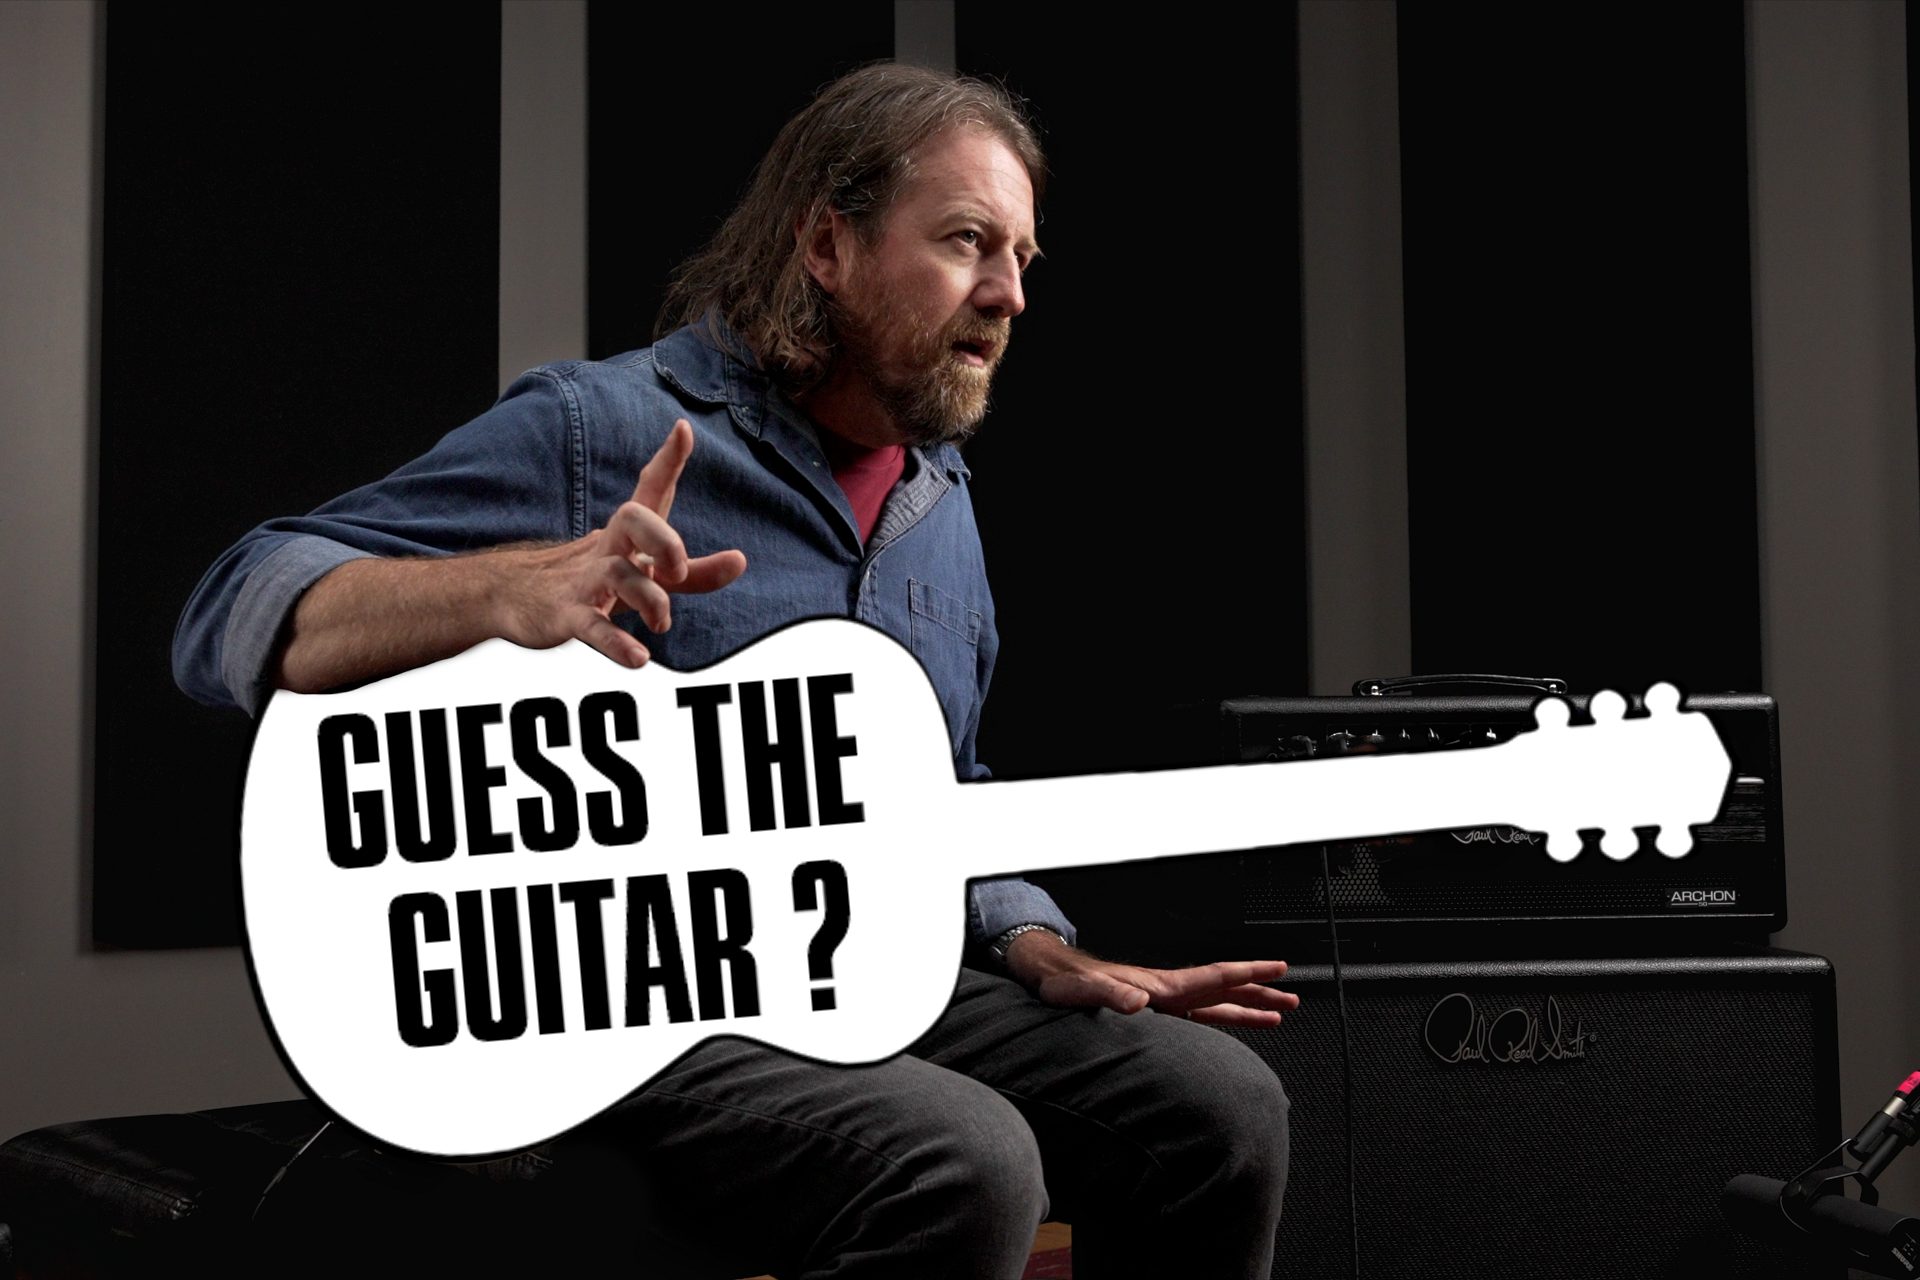 Can You Name That Guitar?